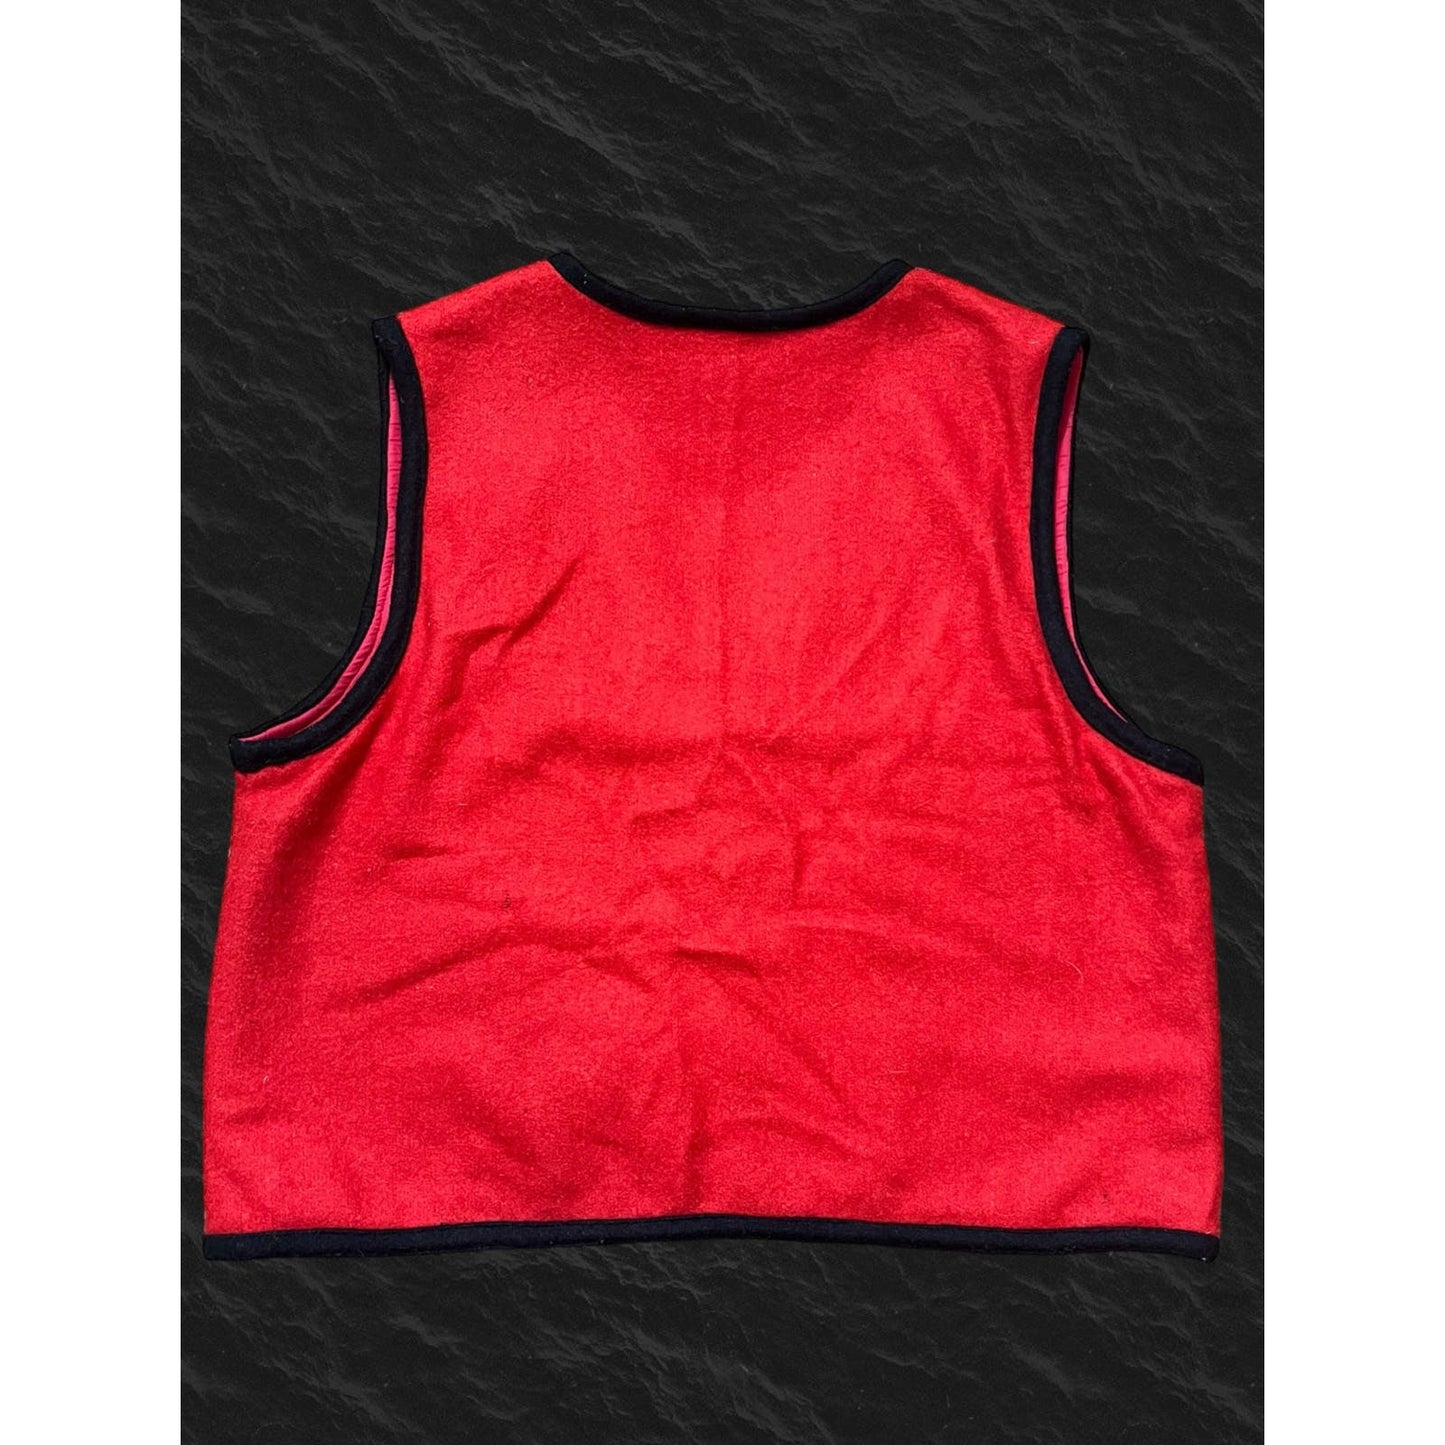 Vintage Red Wool Women’s vest new directions